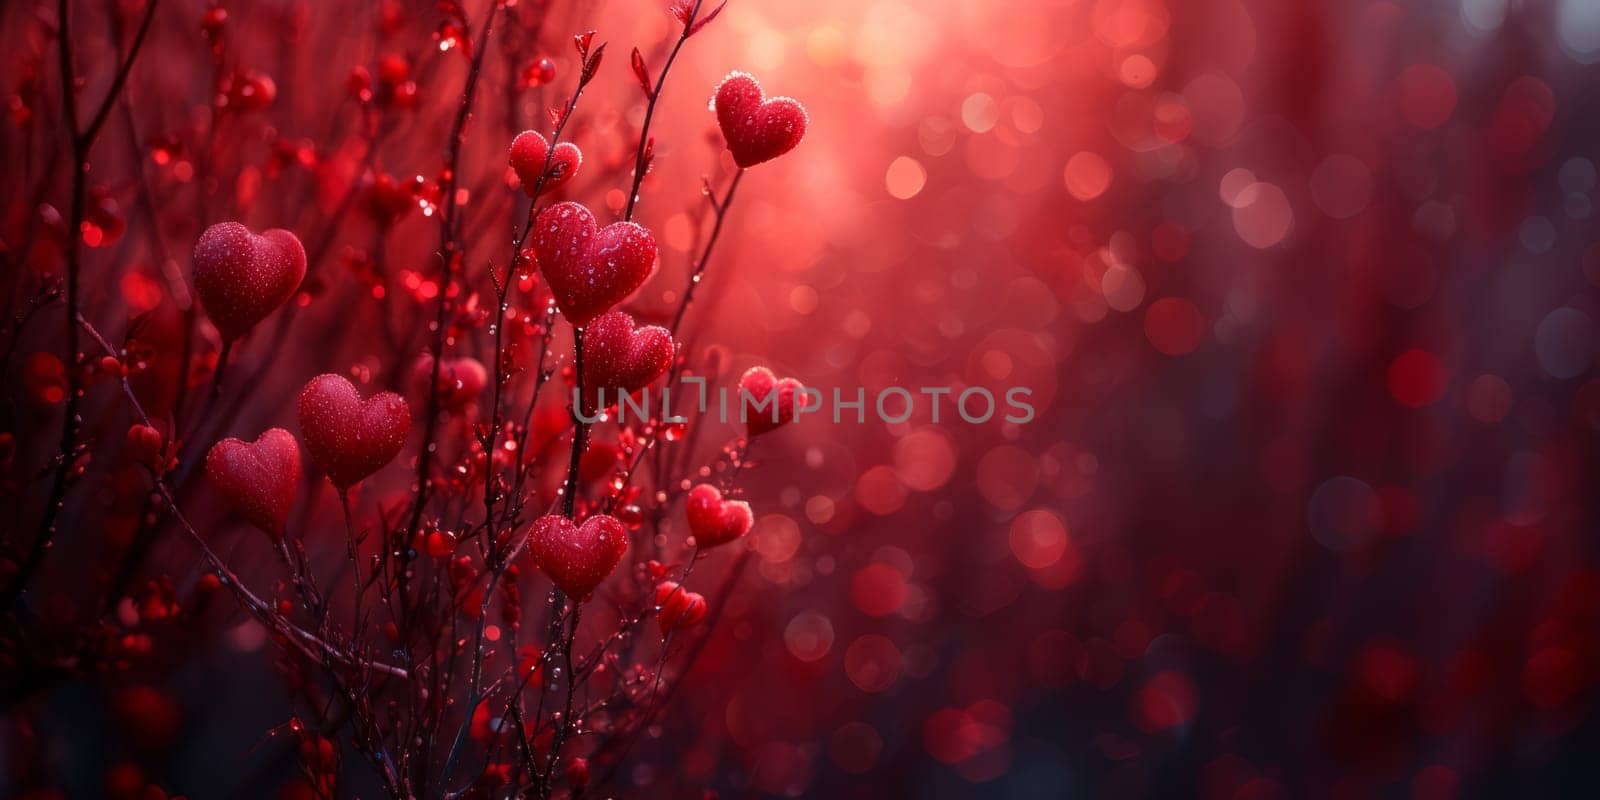 Red bush with hearts on branches valentine's day style by studiodav